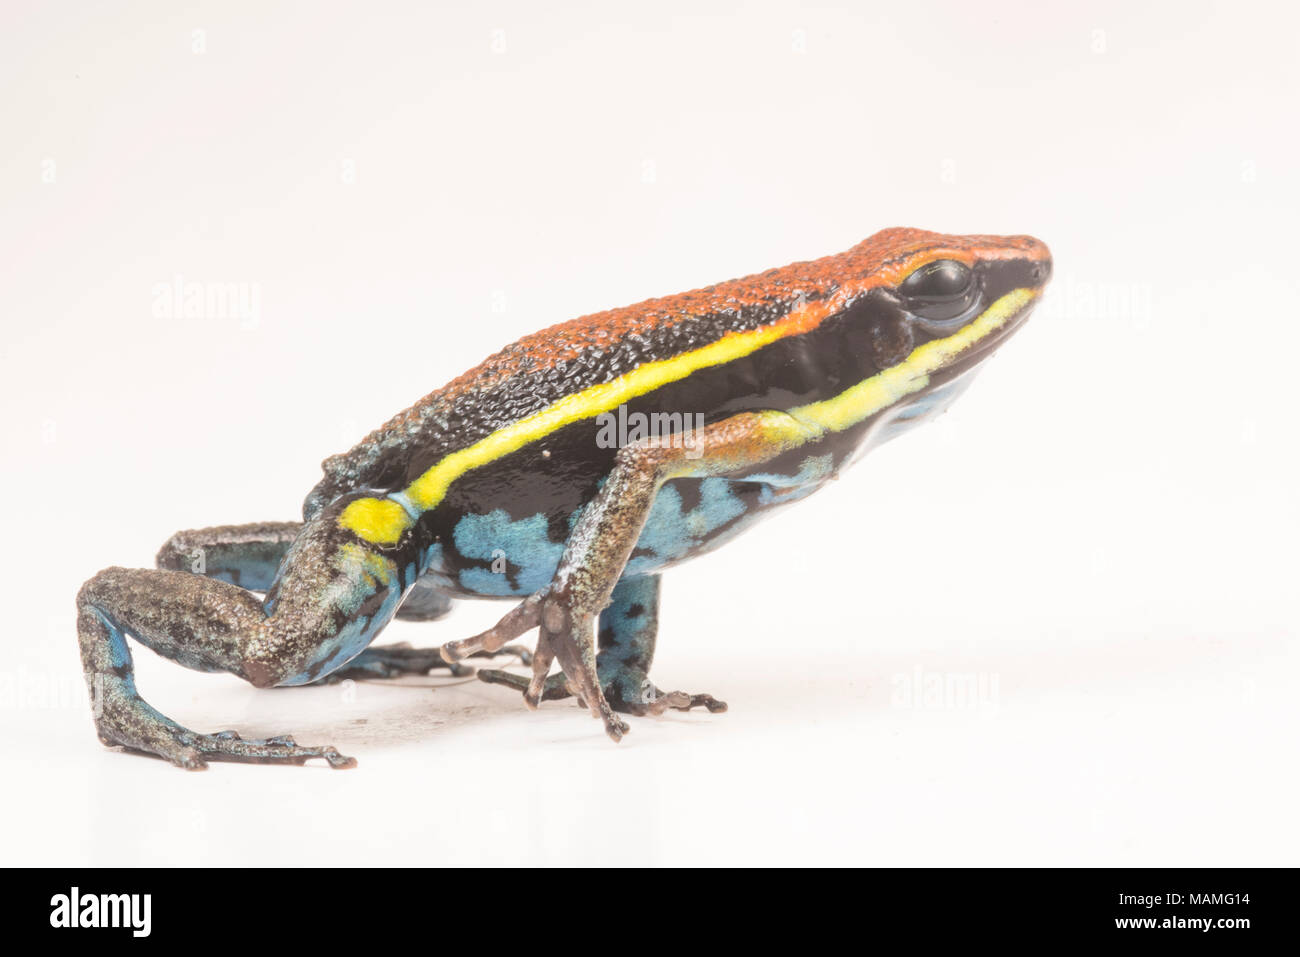 The cainarachi poison frog (Ameerega cainarachi) so called because it is only found in the Cainarachi valley of Peru. Here shown pictured on white. Stock Photo